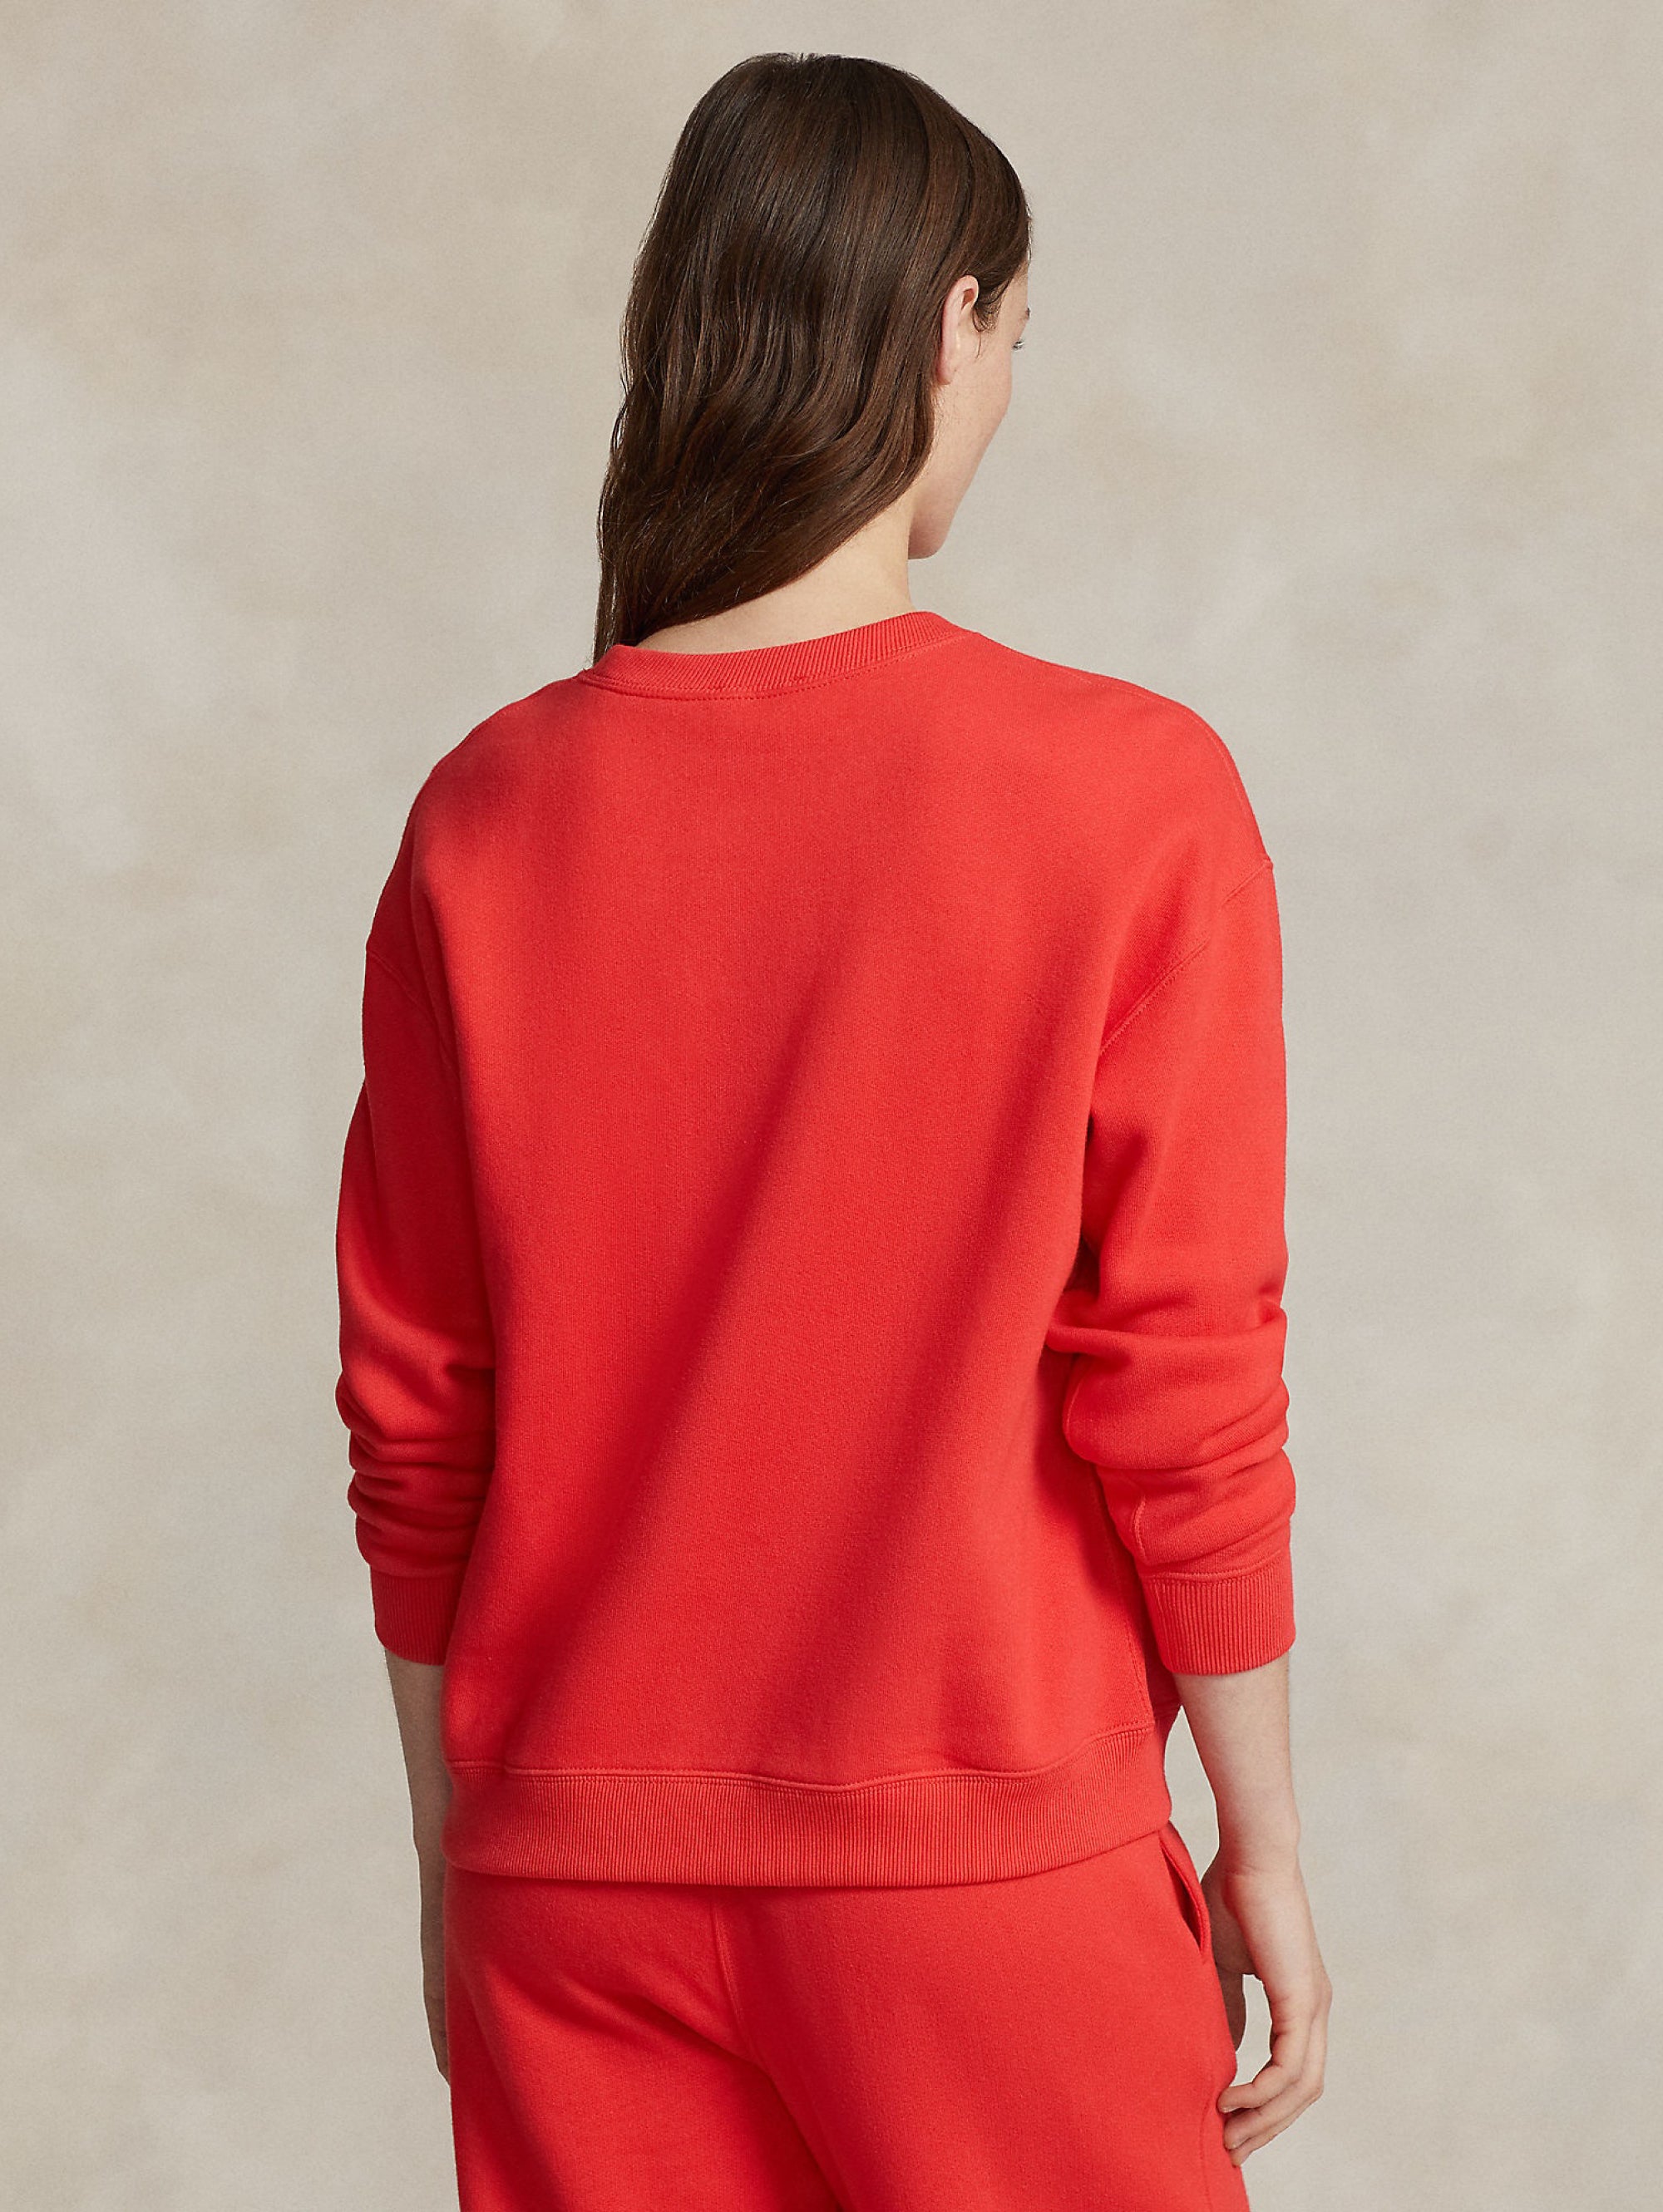 Relaxed Fit Red Crewneck Sweatshirt